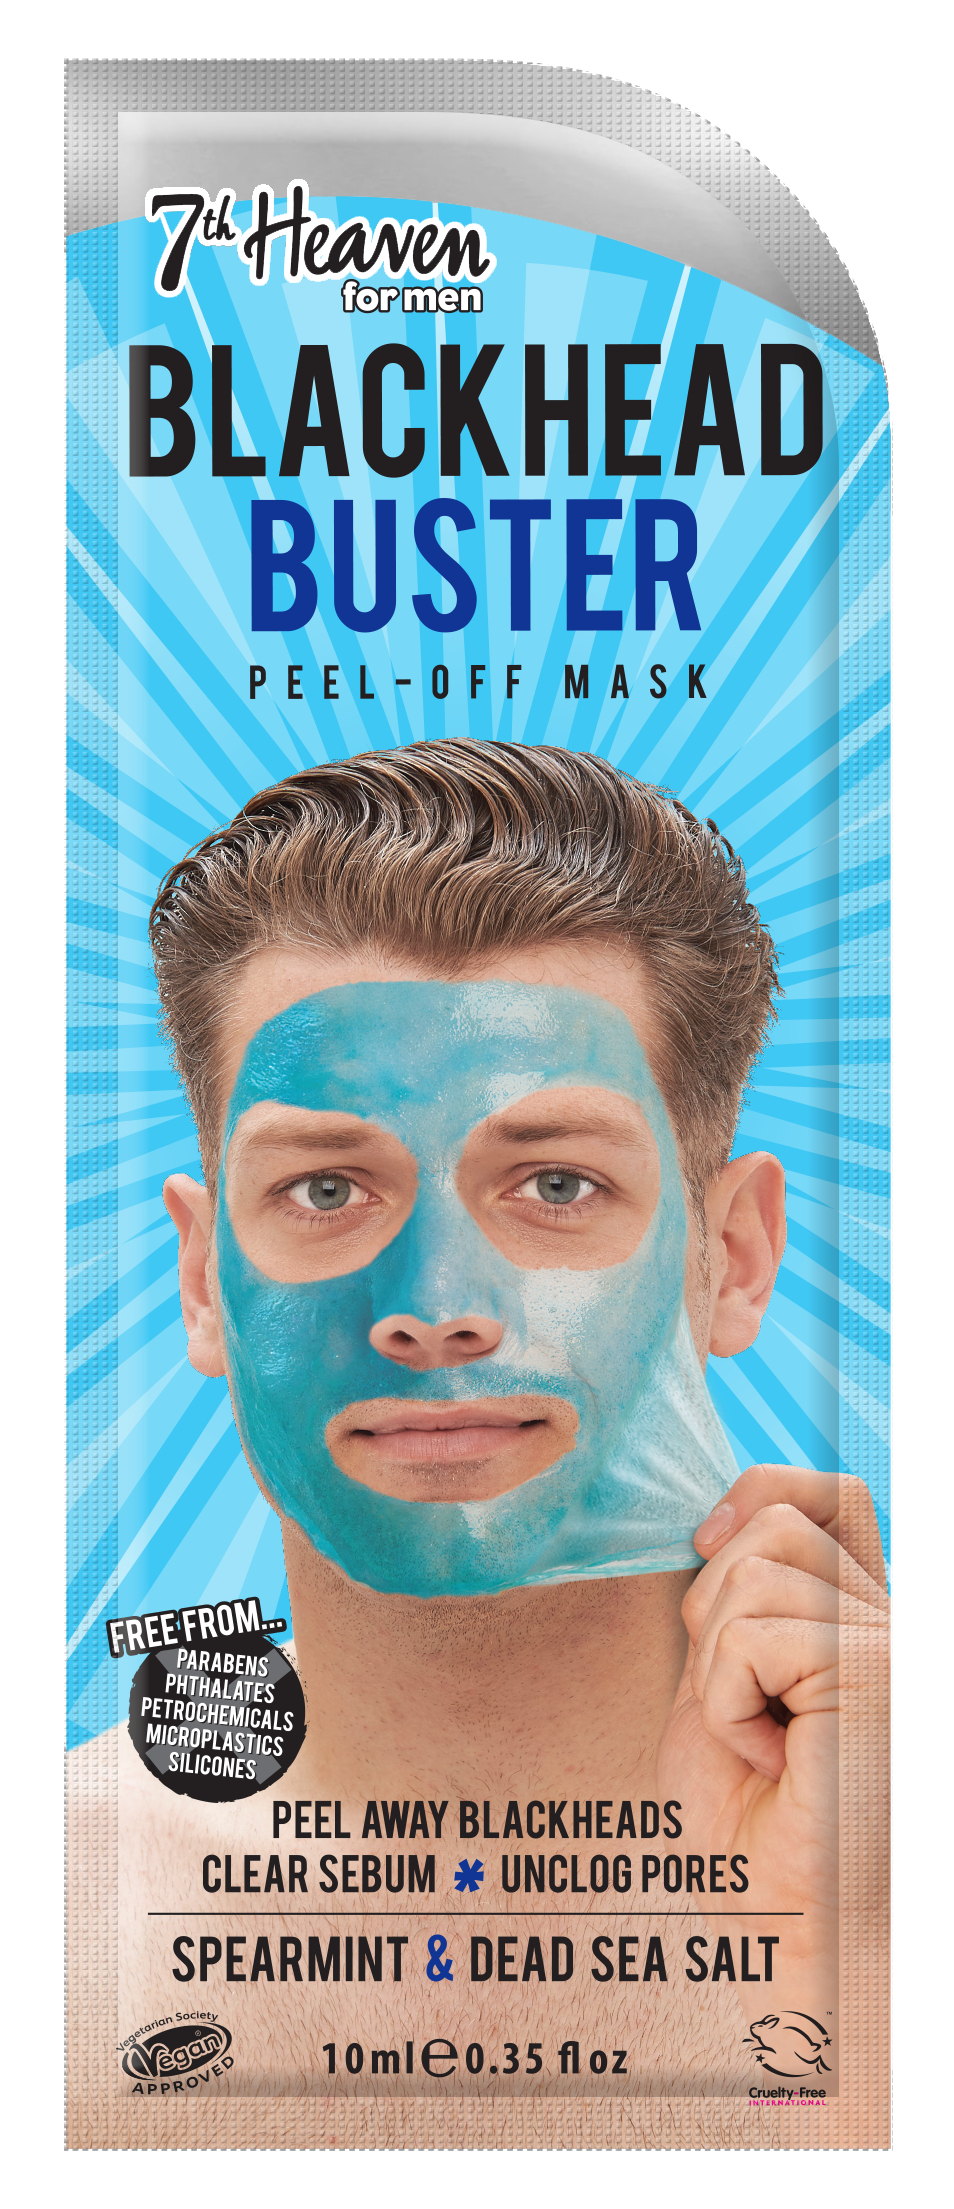 7th Heaven for Men - Blackhead Buster Cleansing Peel-Off Face Mask with Spearmint and Dead Sea Salt to Peel Away Blackheads, Clear Sebum and Unclog Pores